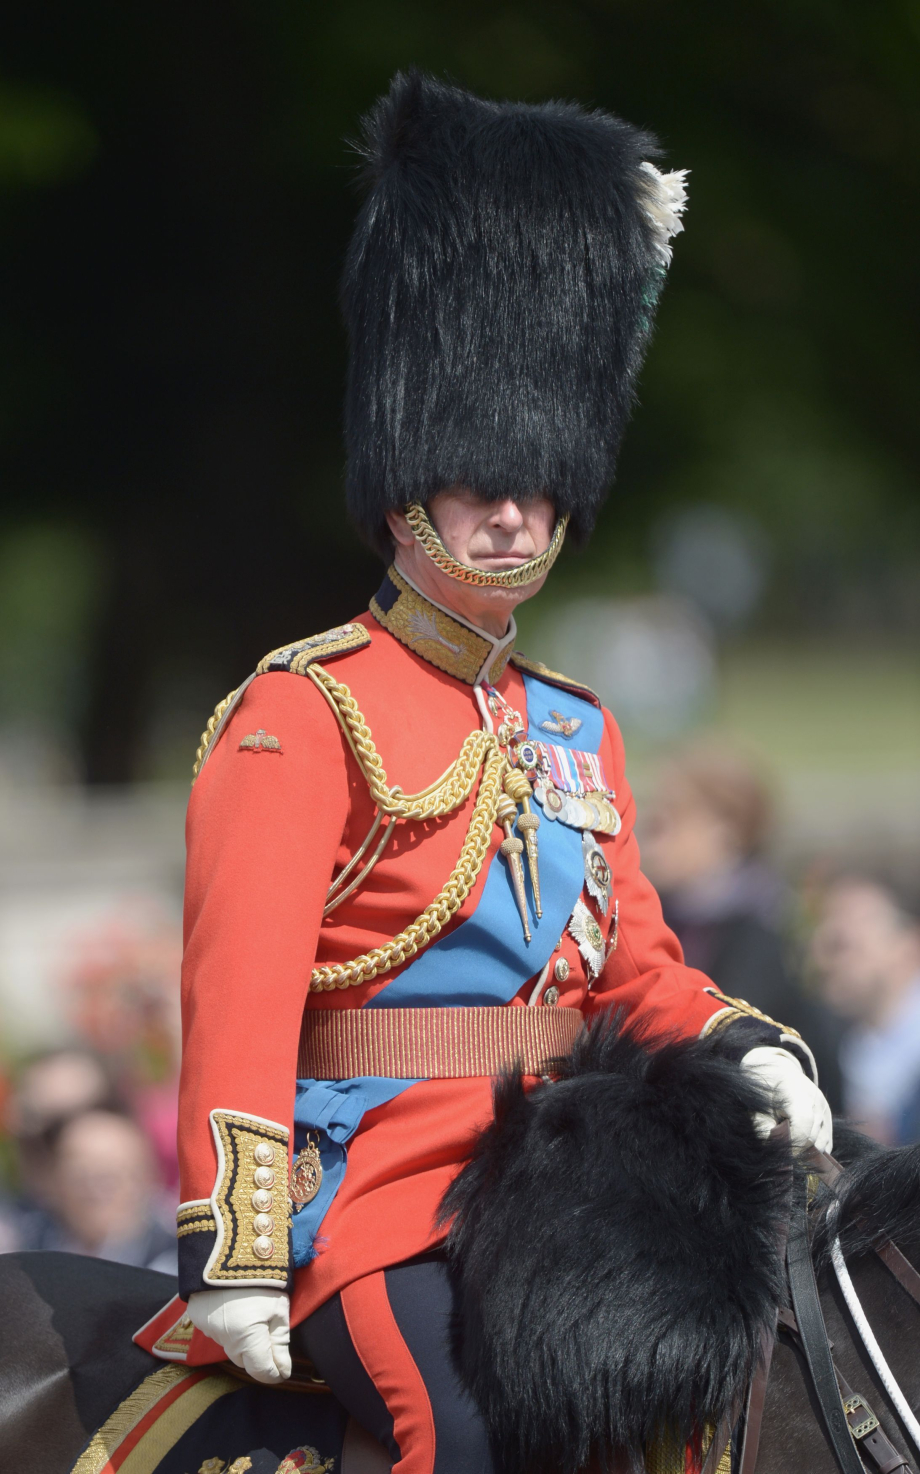 The Prince of Wales in a bearskin hat